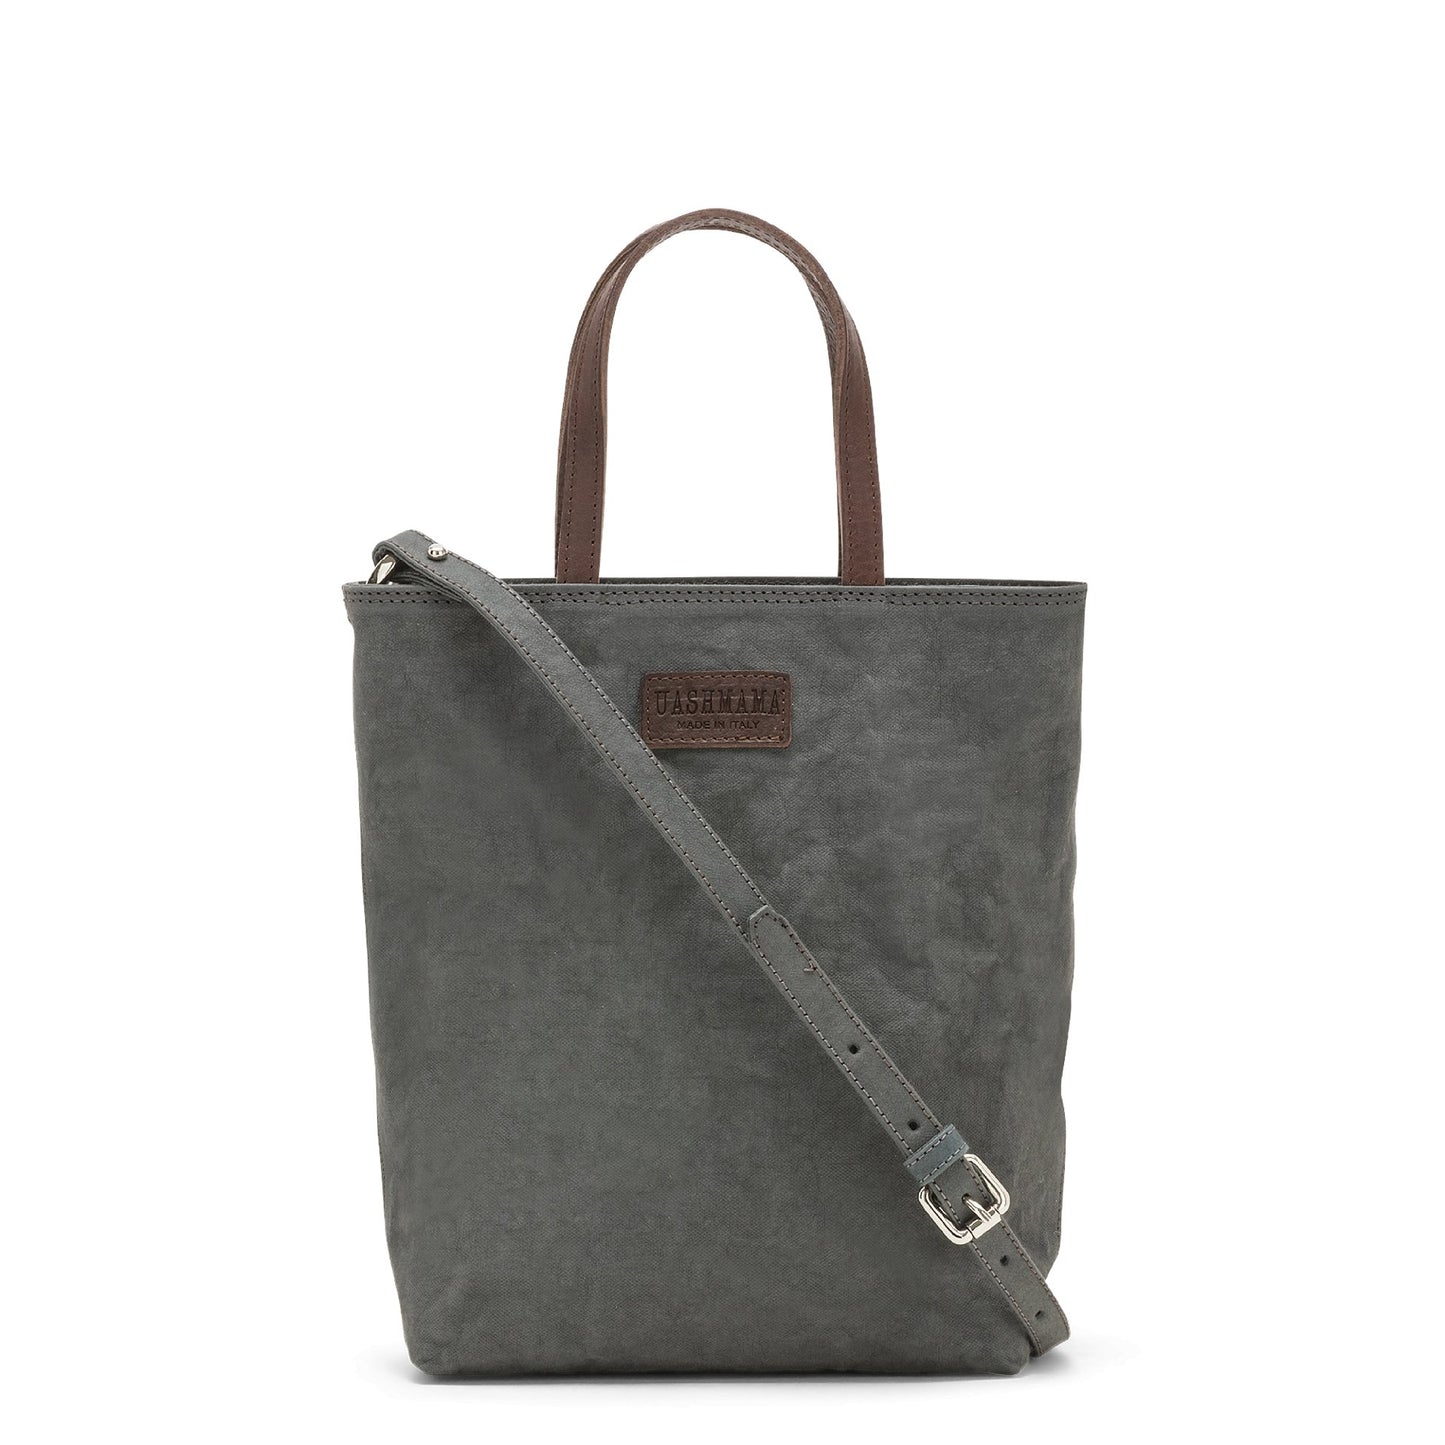 A washable paper rectangular tote with long top handles and a long shoulder strap is shown from the front angle. It is dark grey in colour.